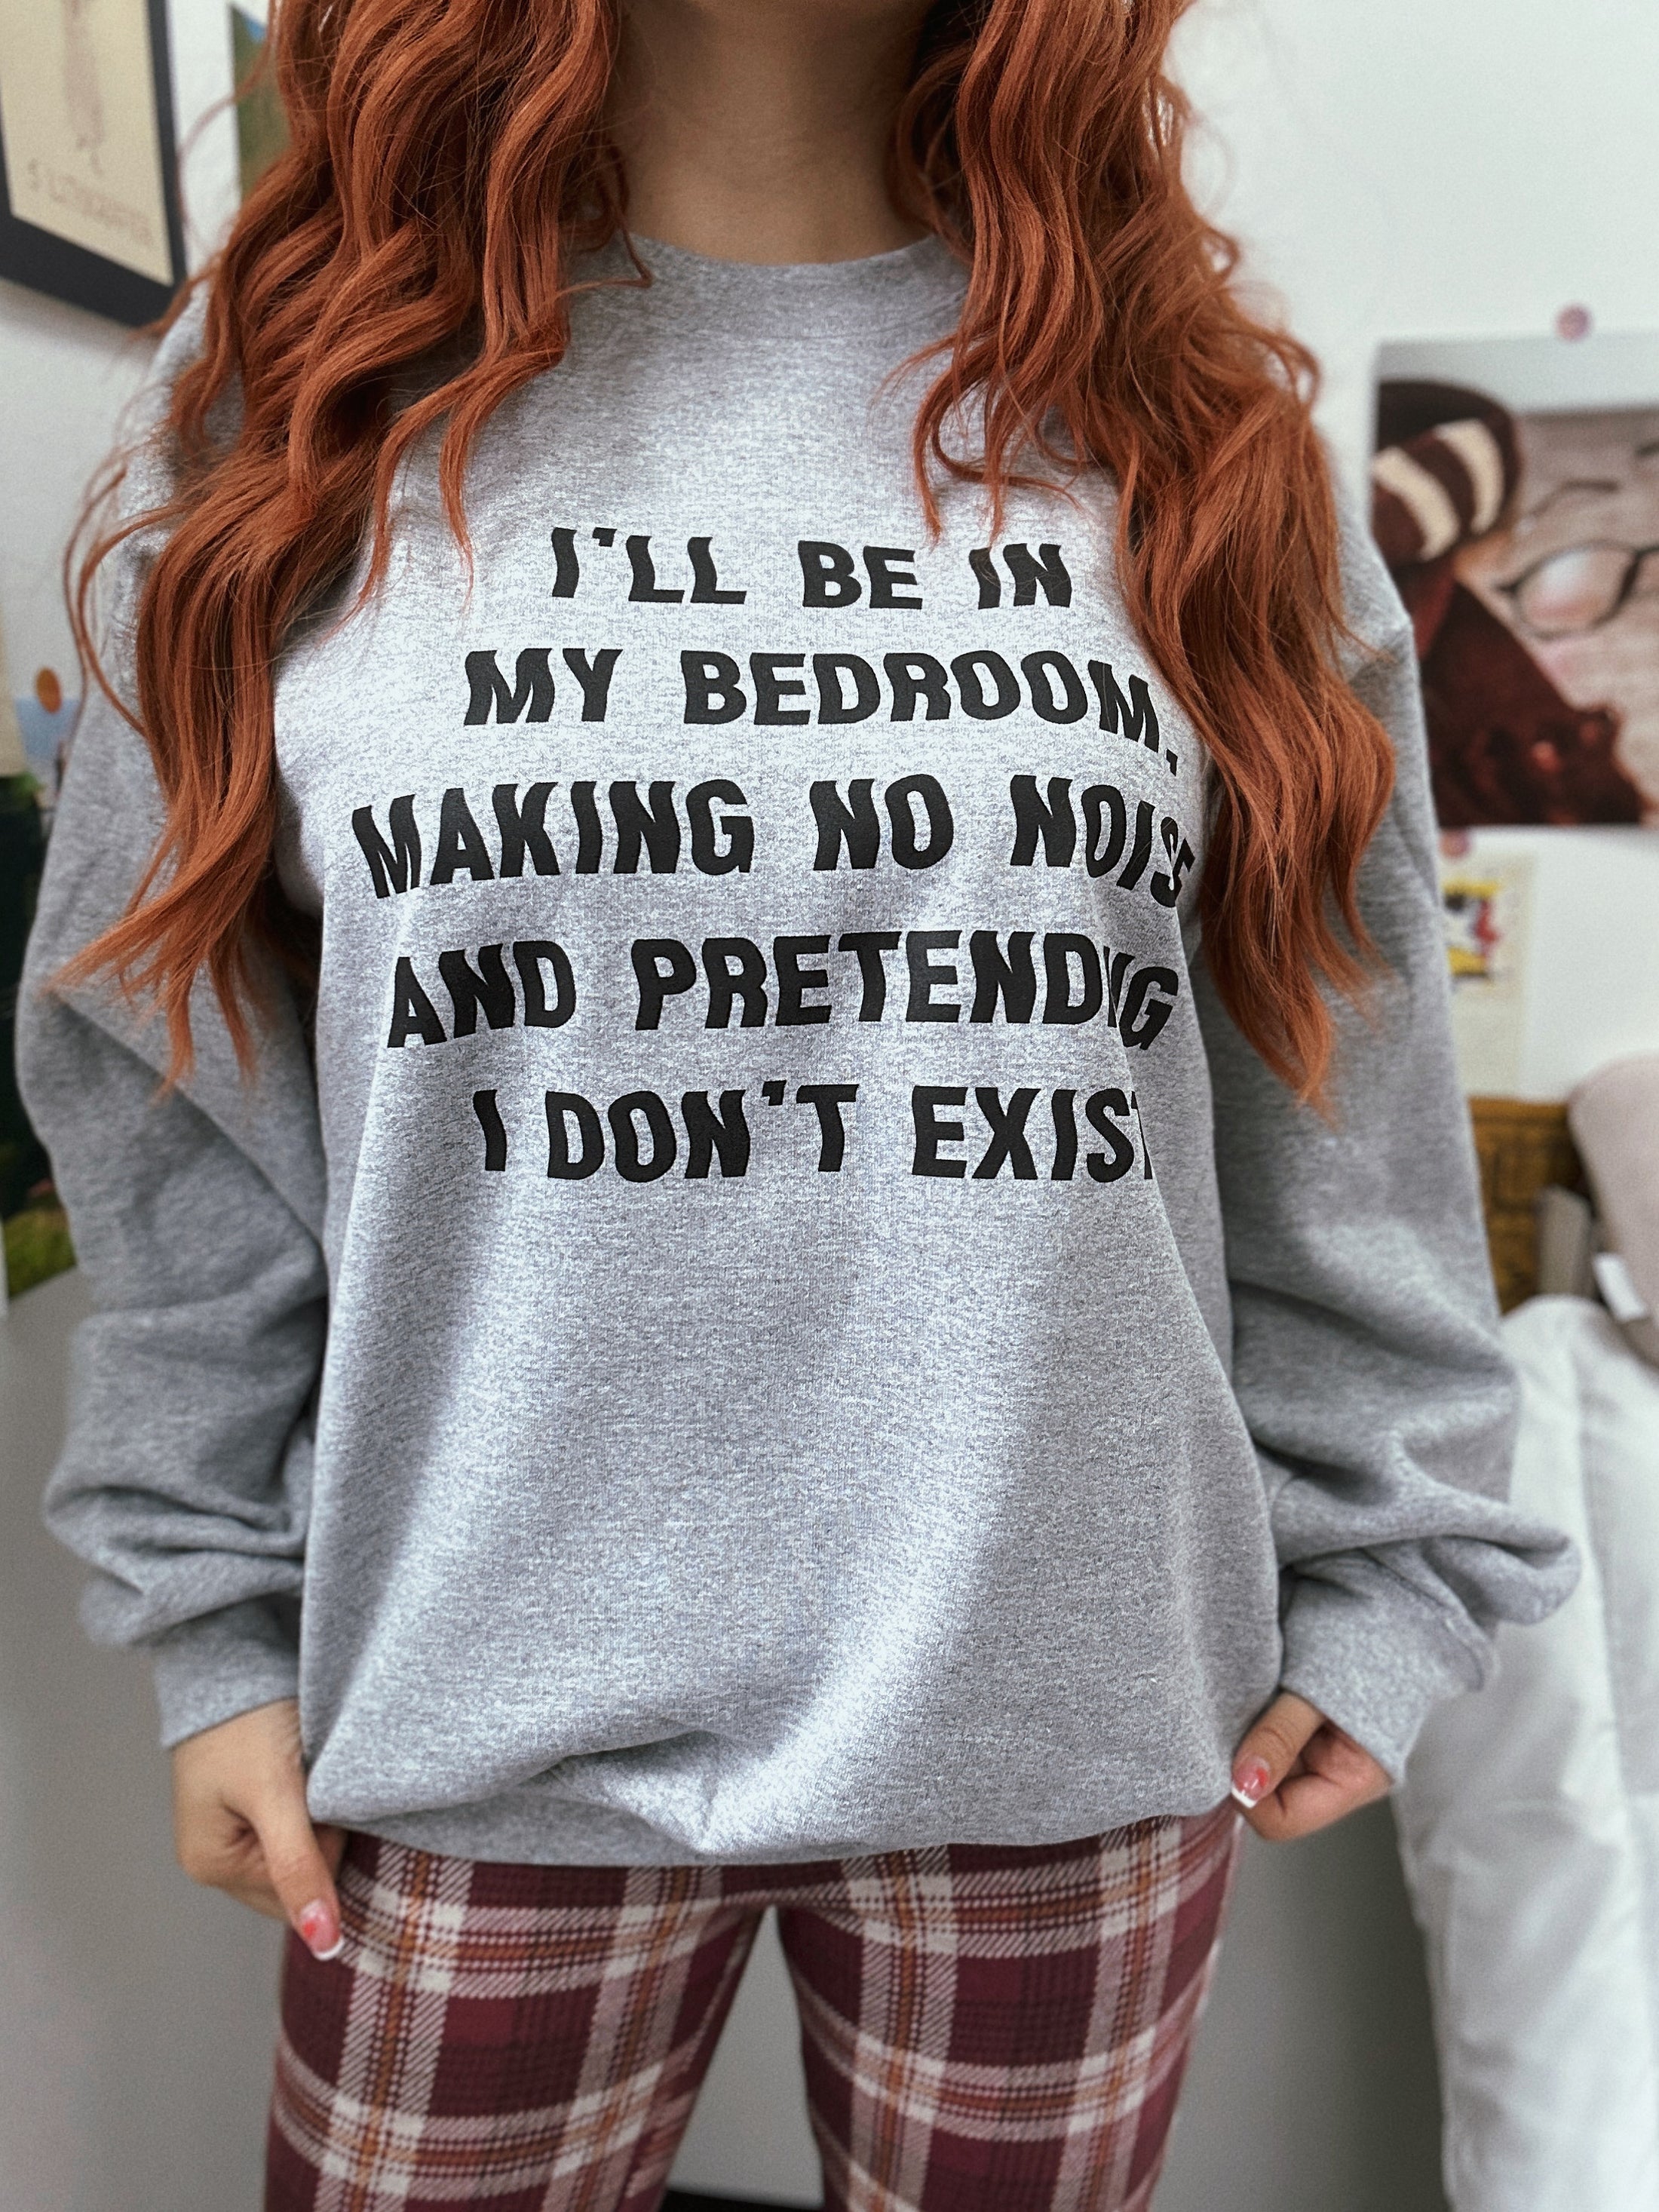 I'll Be In My Bed Room Graphic Sweatshirt